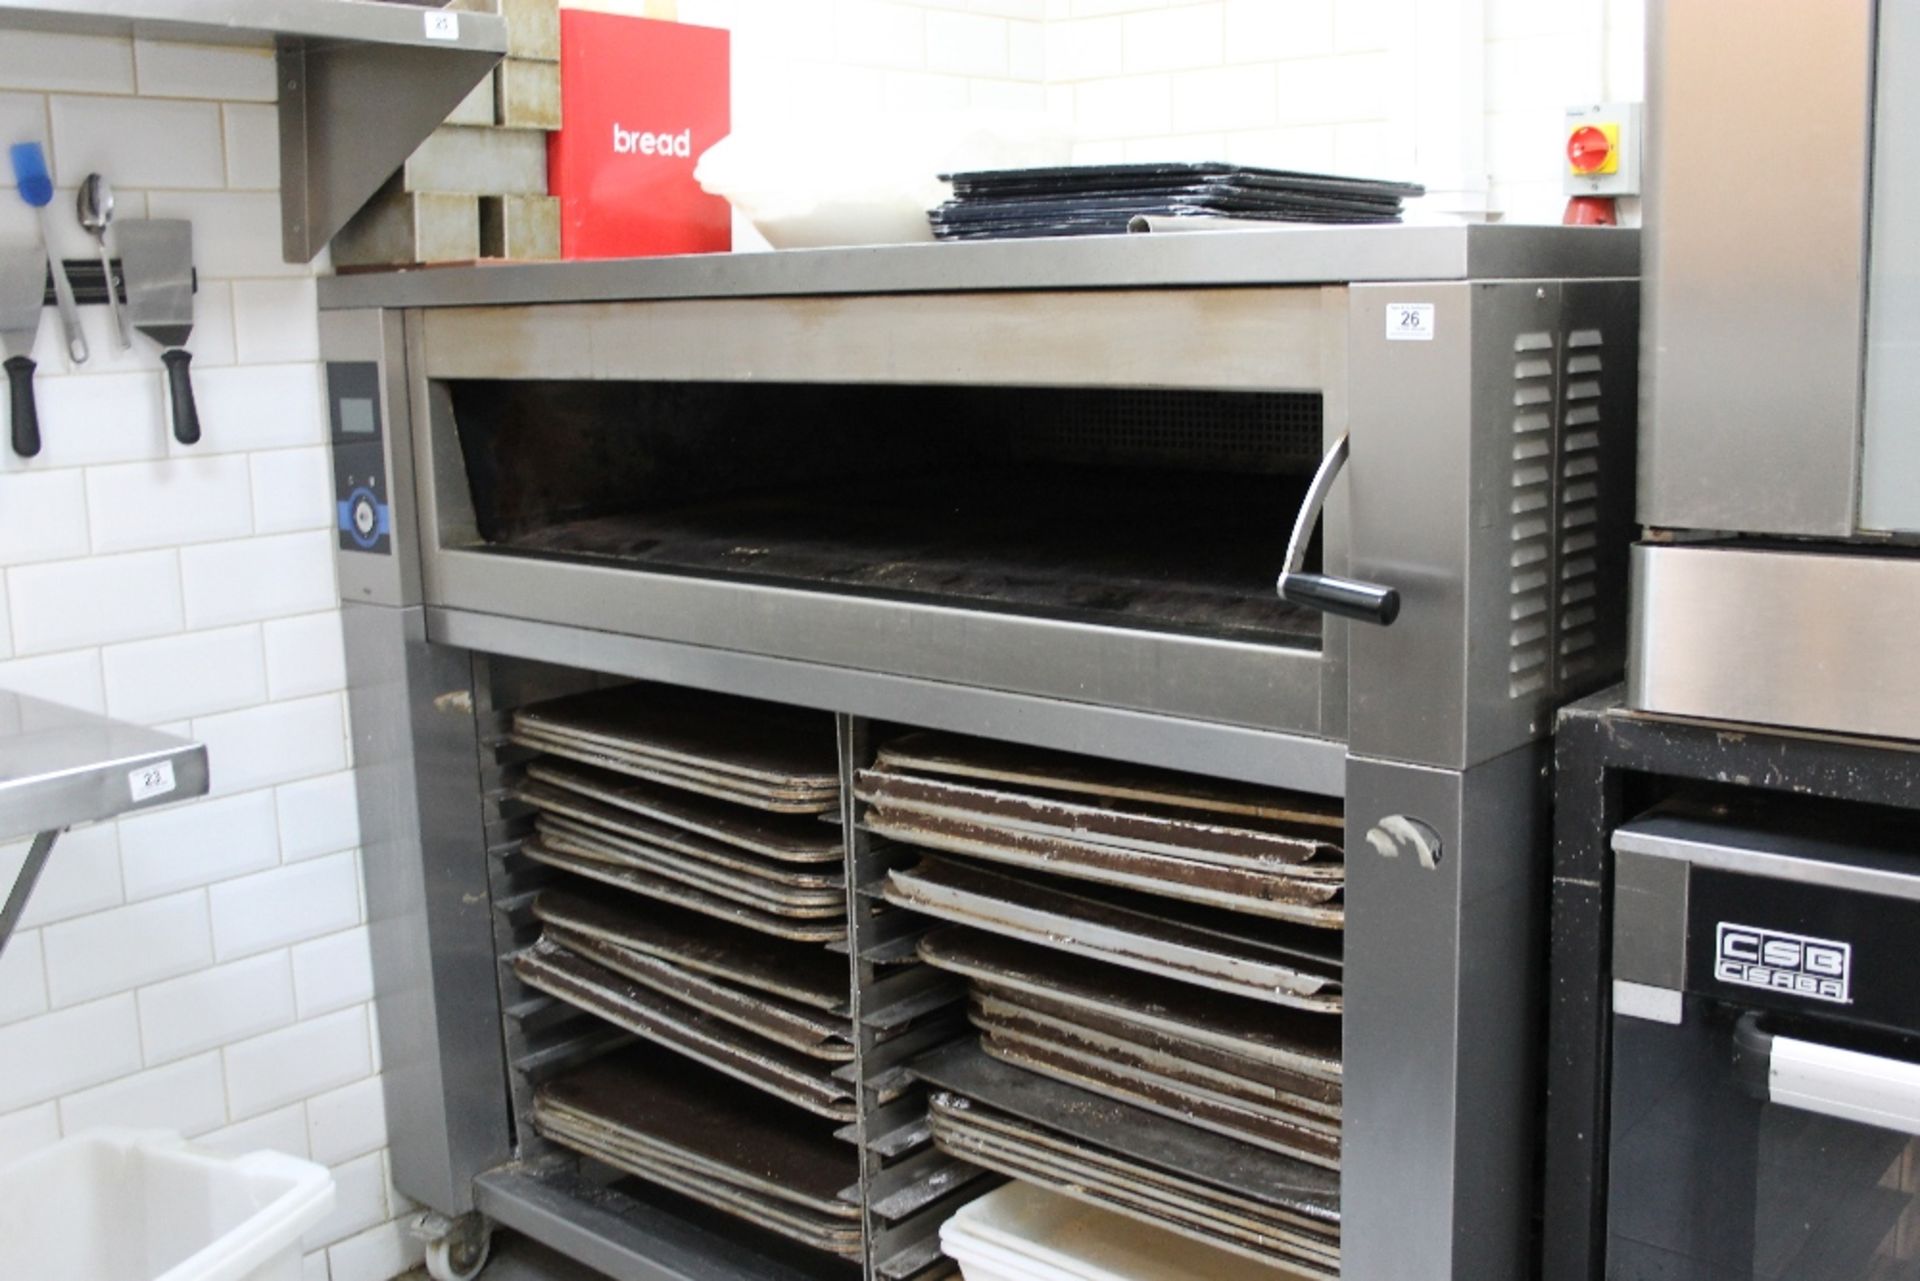 Large Stainless Steel Single Deck Bread / Pastries Oven Under Storage – includes large number of